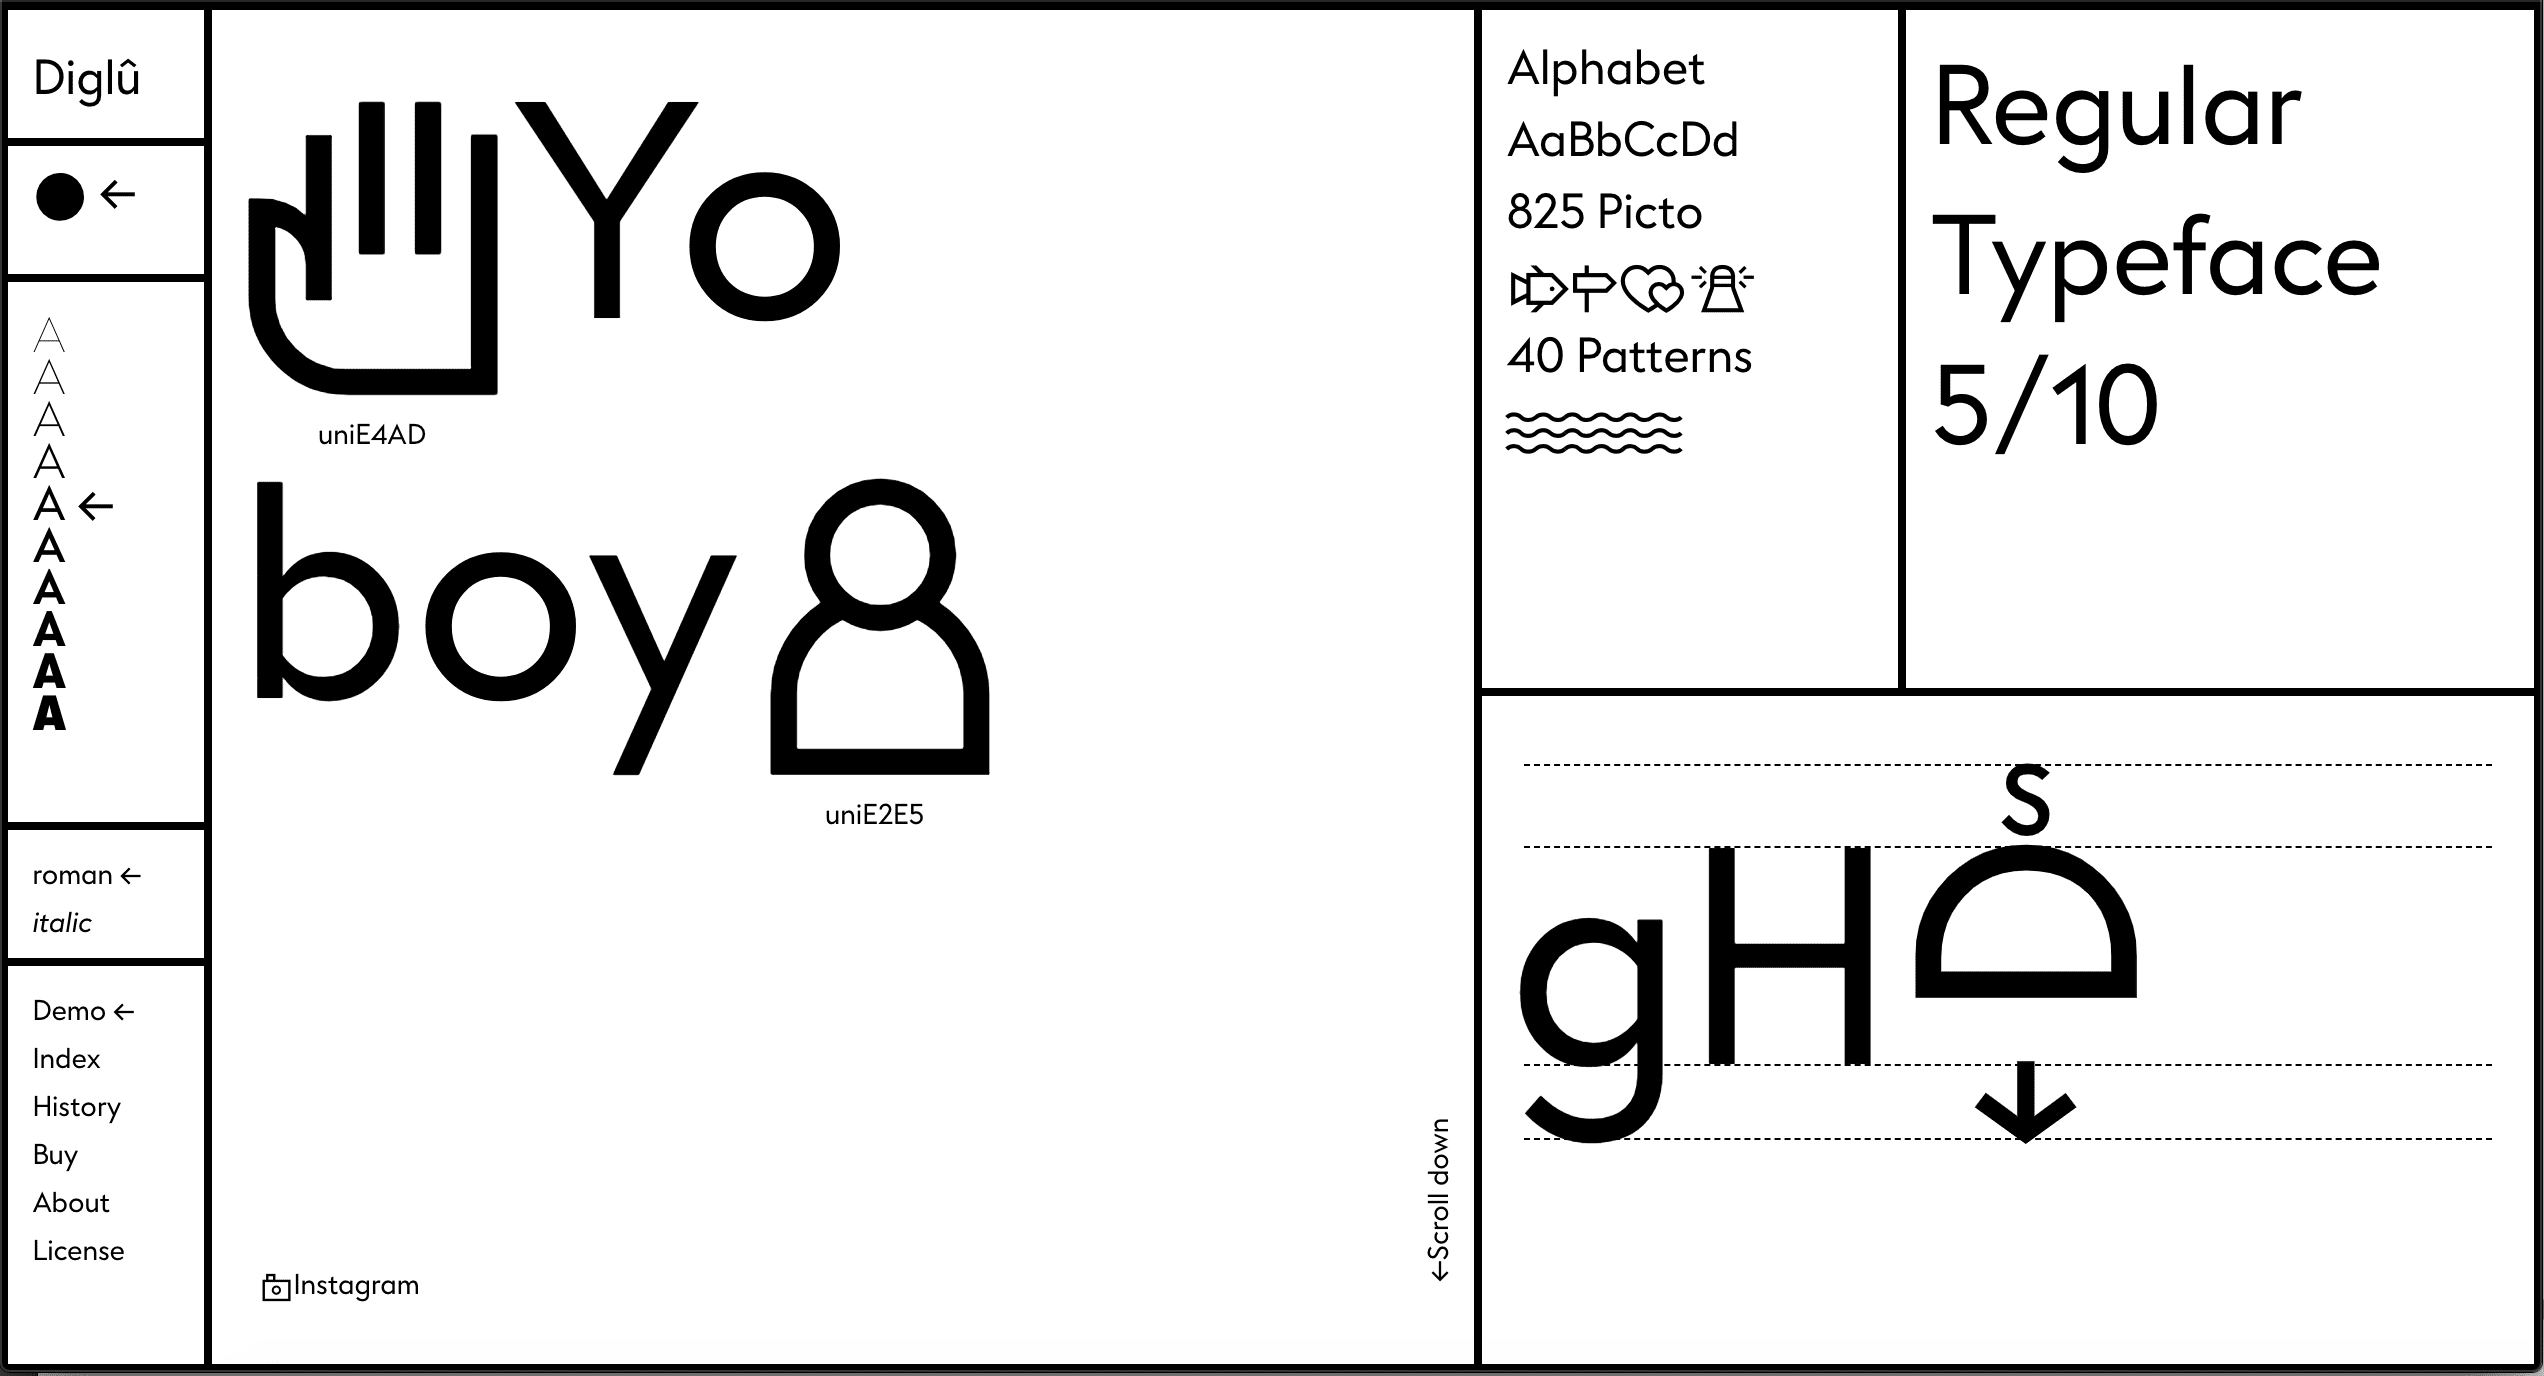 Diglu font, a typography with pictograms.